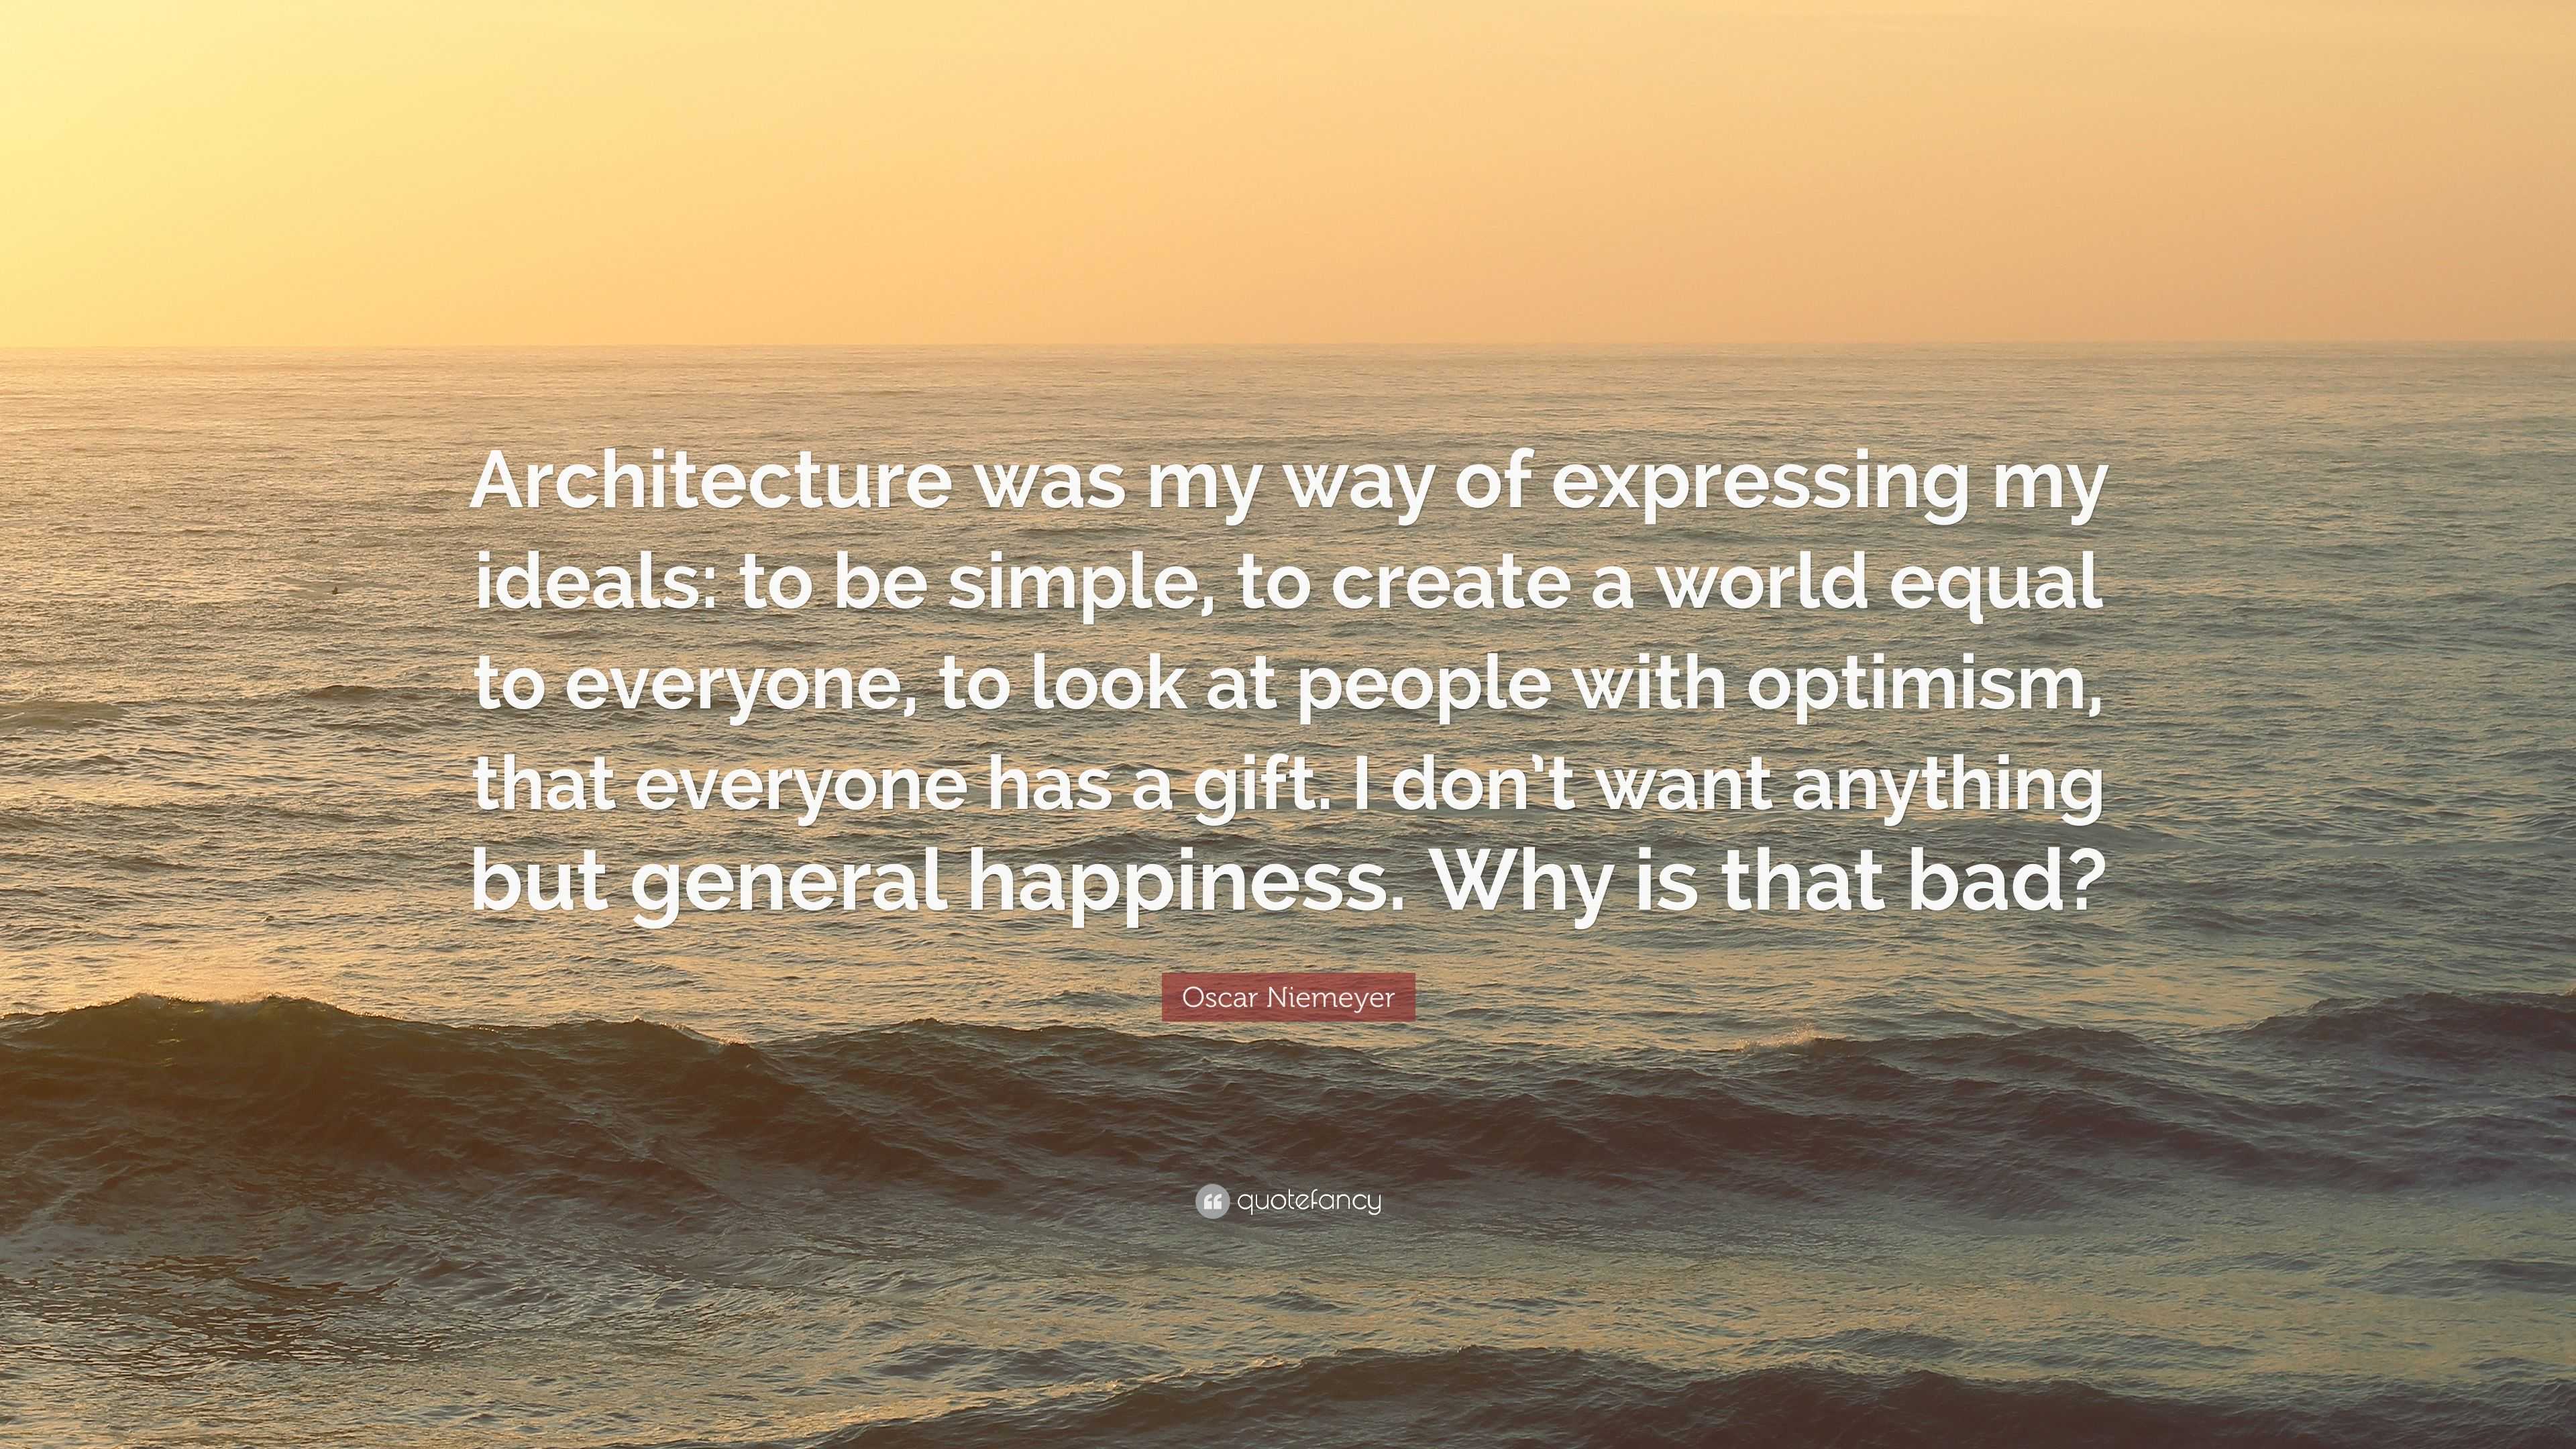 Oscar Niemeyer Quote: “Architecture was my way of expressing my ideals ...